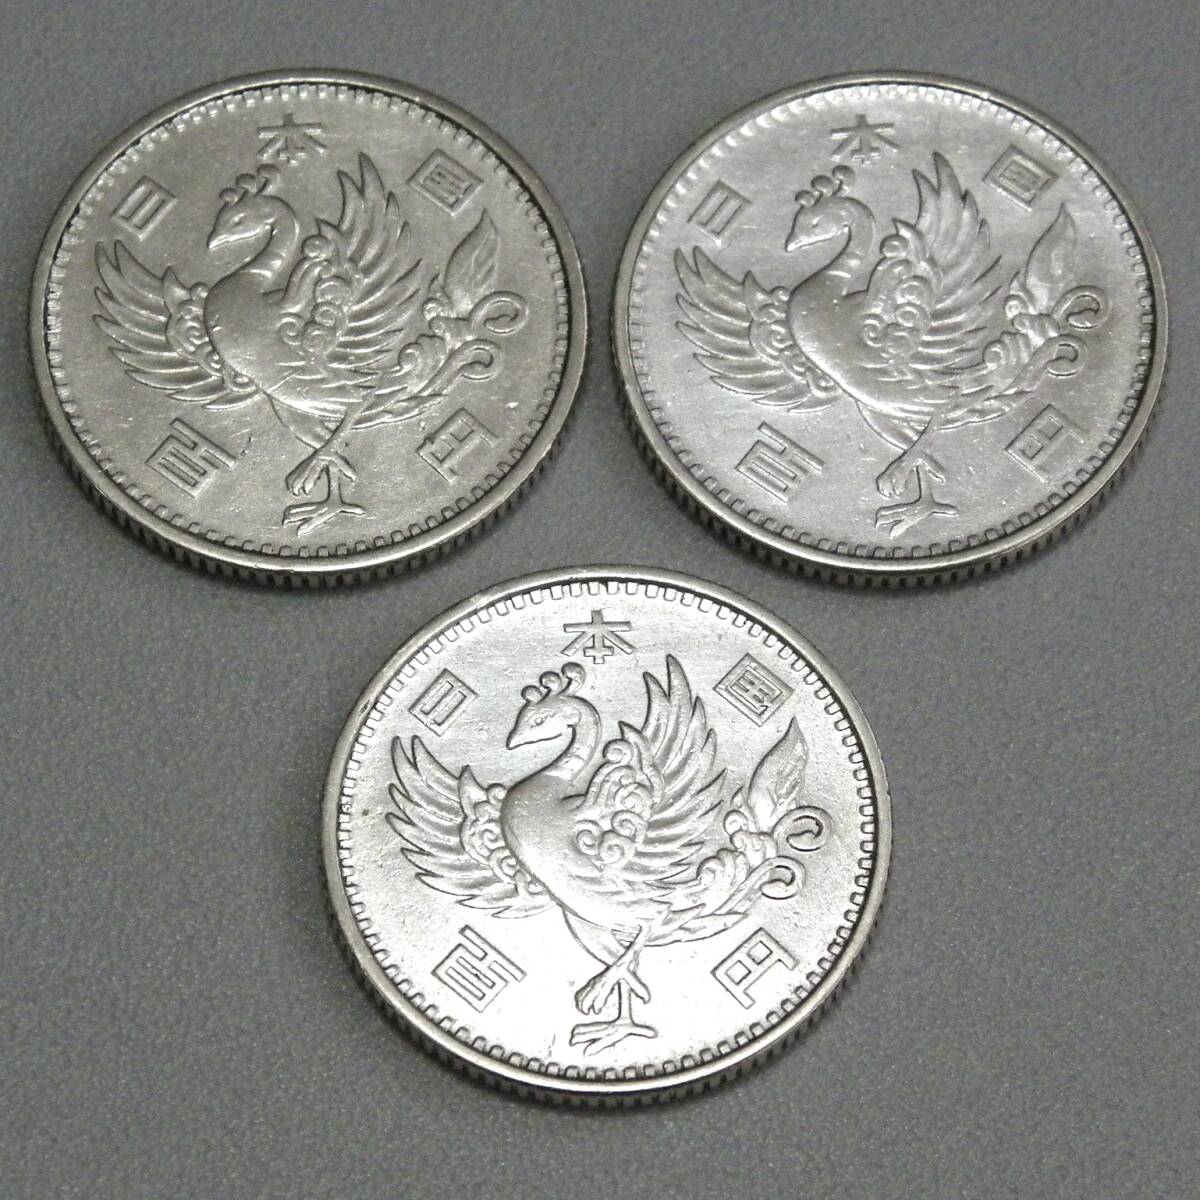 * old coin [ 100 jpy silver coin phoenix 3 sheets ] 300 jpy Showa era 32,33 year issue 1957,1958 year 100 jpy [ together transactions . postage saving ]